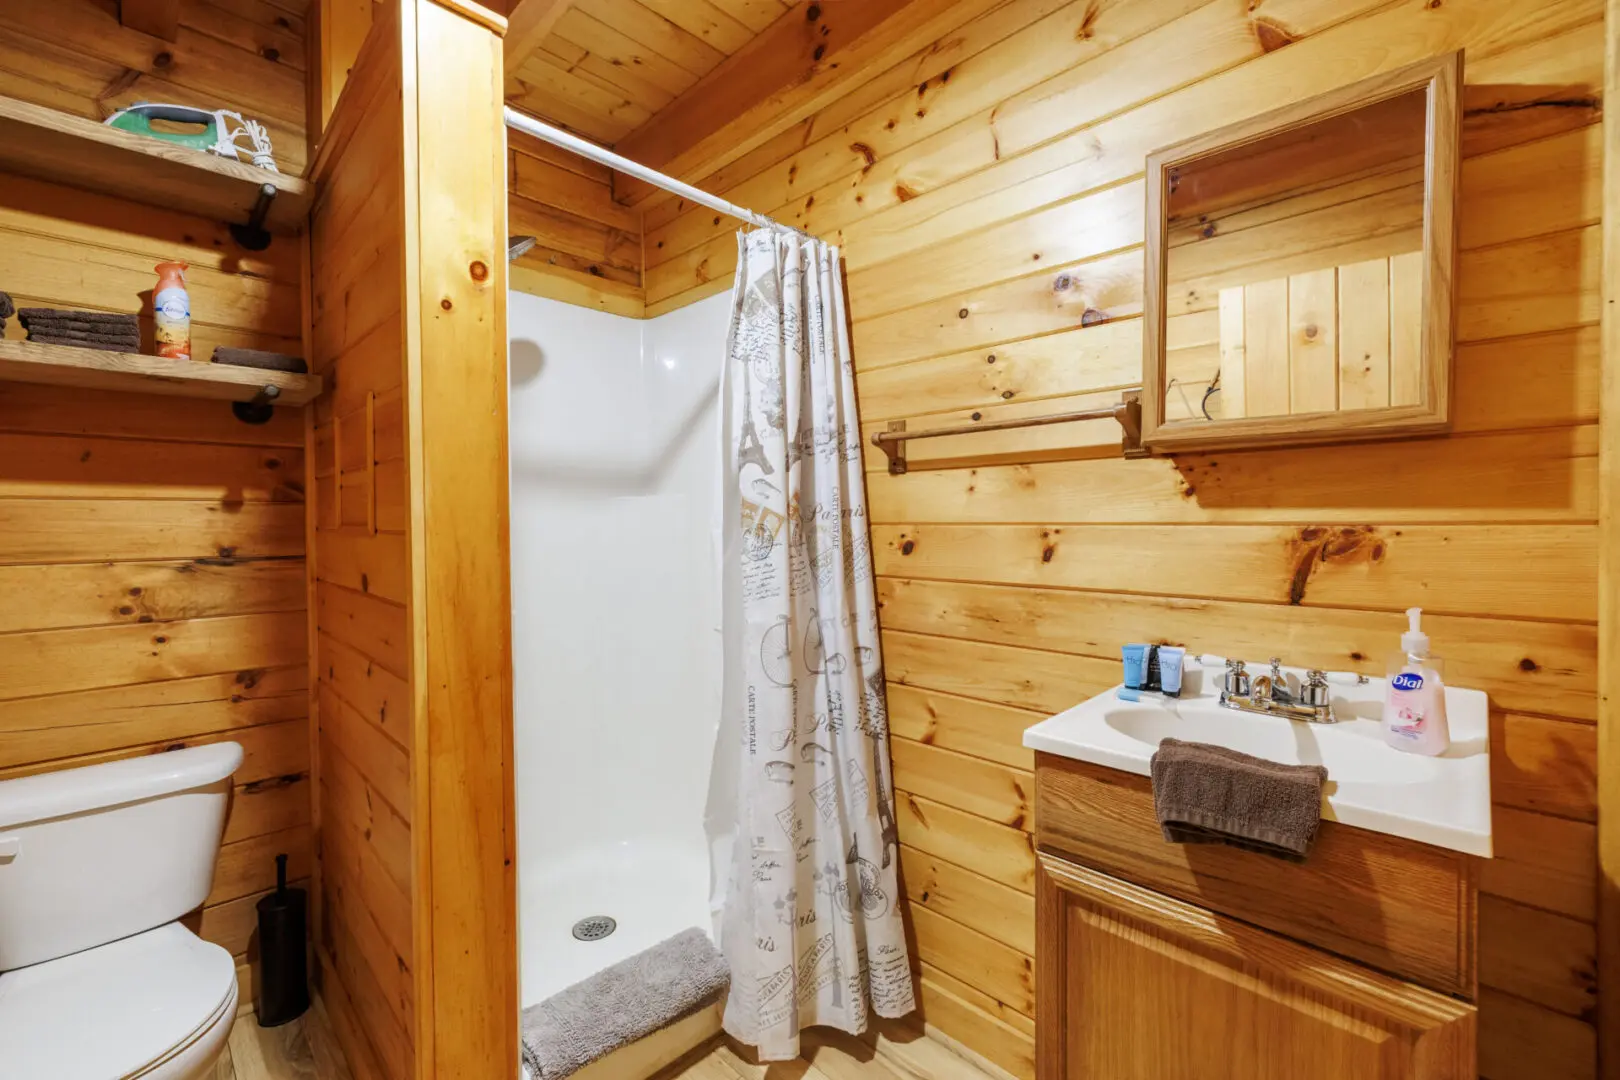 A bathroom with a shower and toilet in a log cabin.